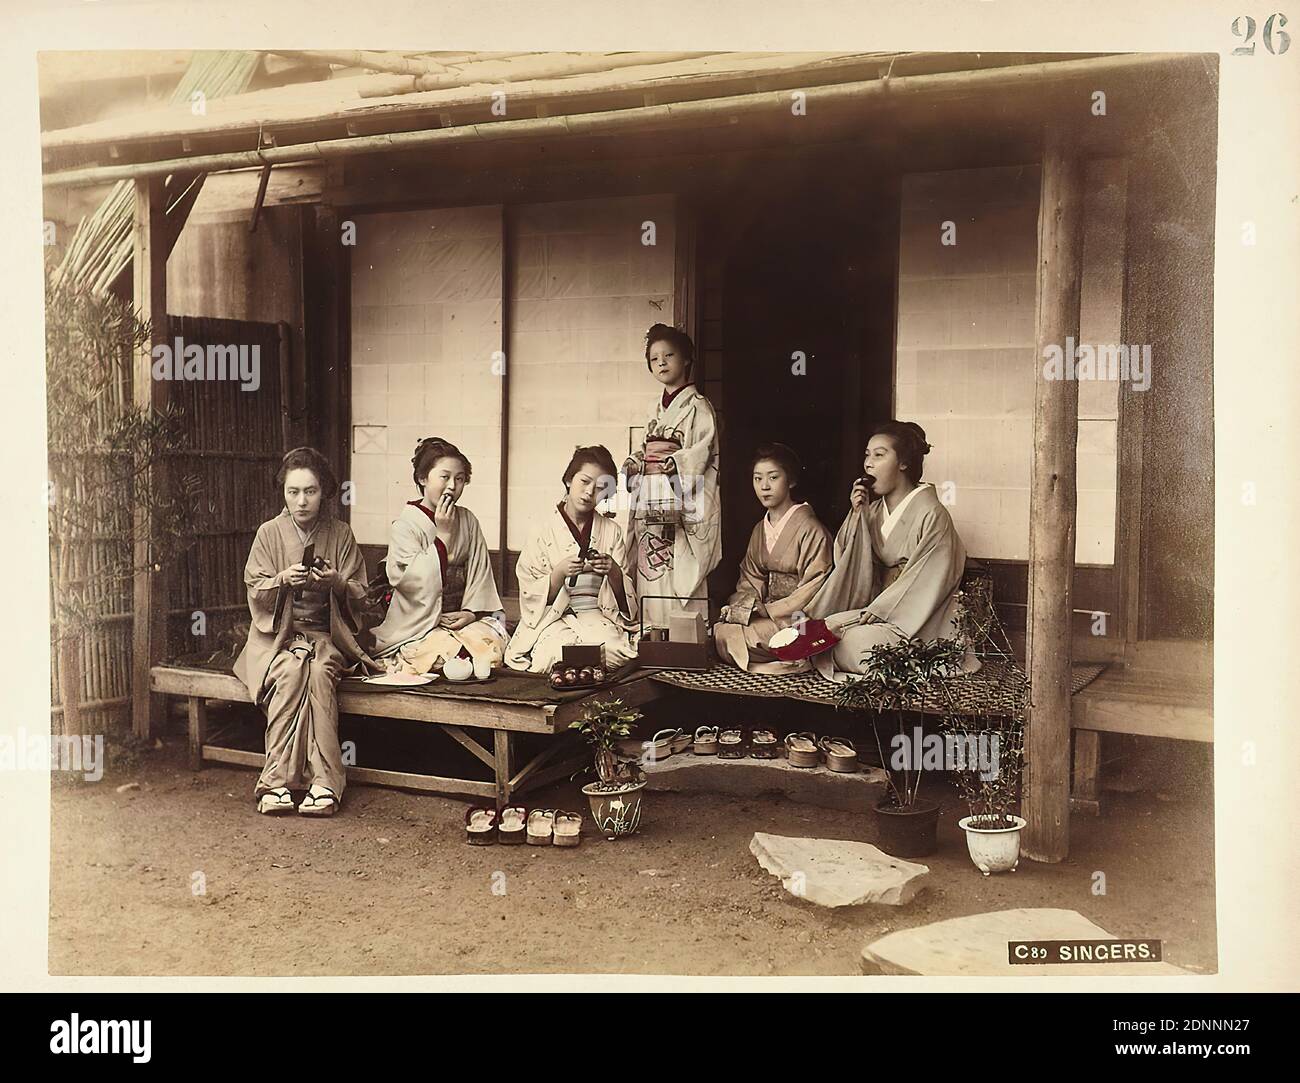 C89 Singers, albumin paper, black and white positive process, hand colored, image size: height: 21,40 cm; width: 27,40 cm, titled, C89 Singers, titled: recto o. r.: 26, travel photography, portrait photography, group portrait, residential house, storey house, woman, sitting figure, kneeling figure, standing figure, folk costume, regional costume Stock Photo